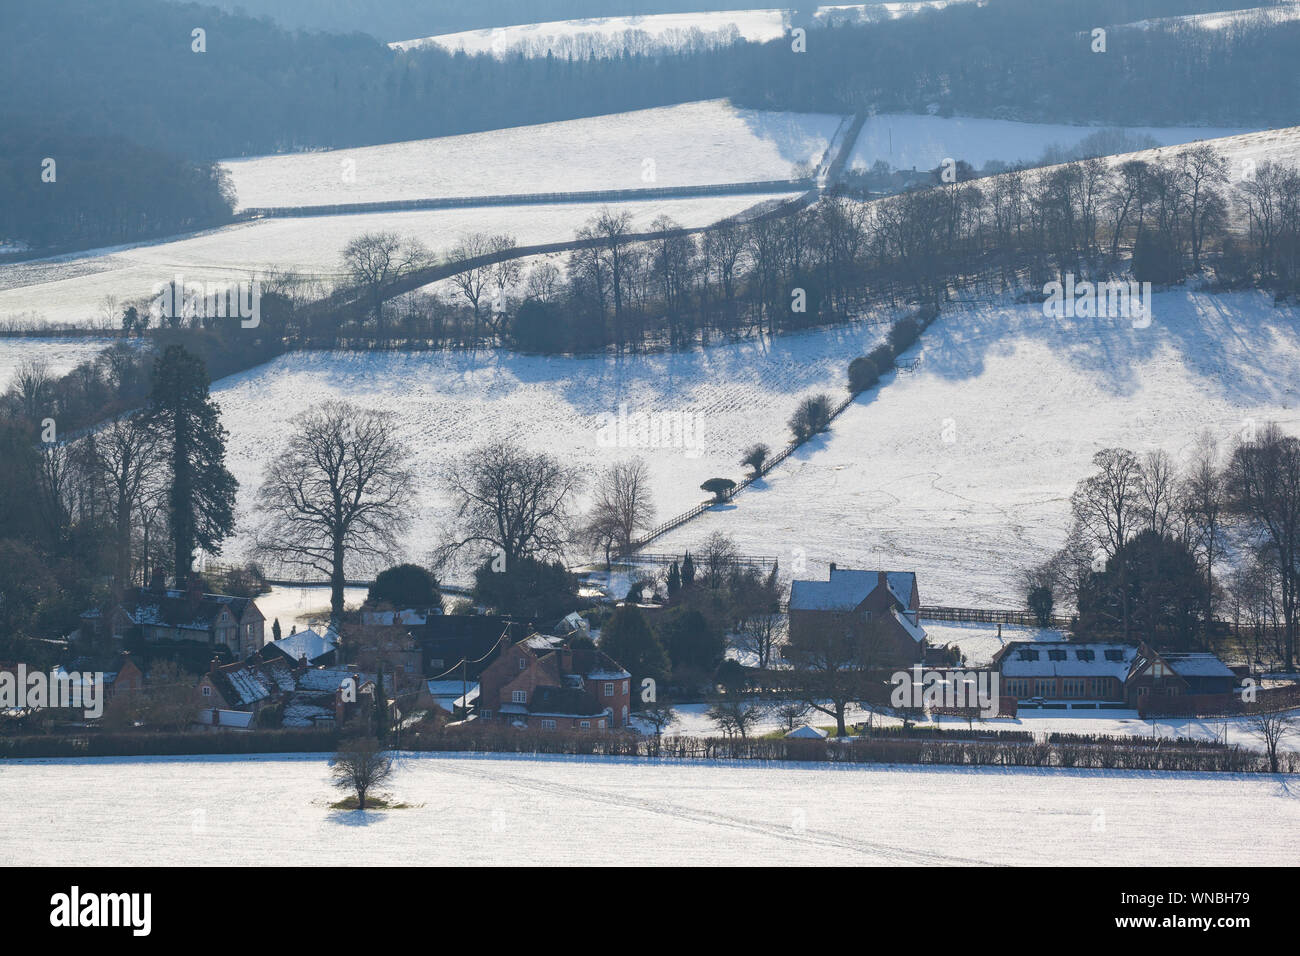 Winter landscape above the Chiltern village of Turville with snow on the ground. Stock Photo